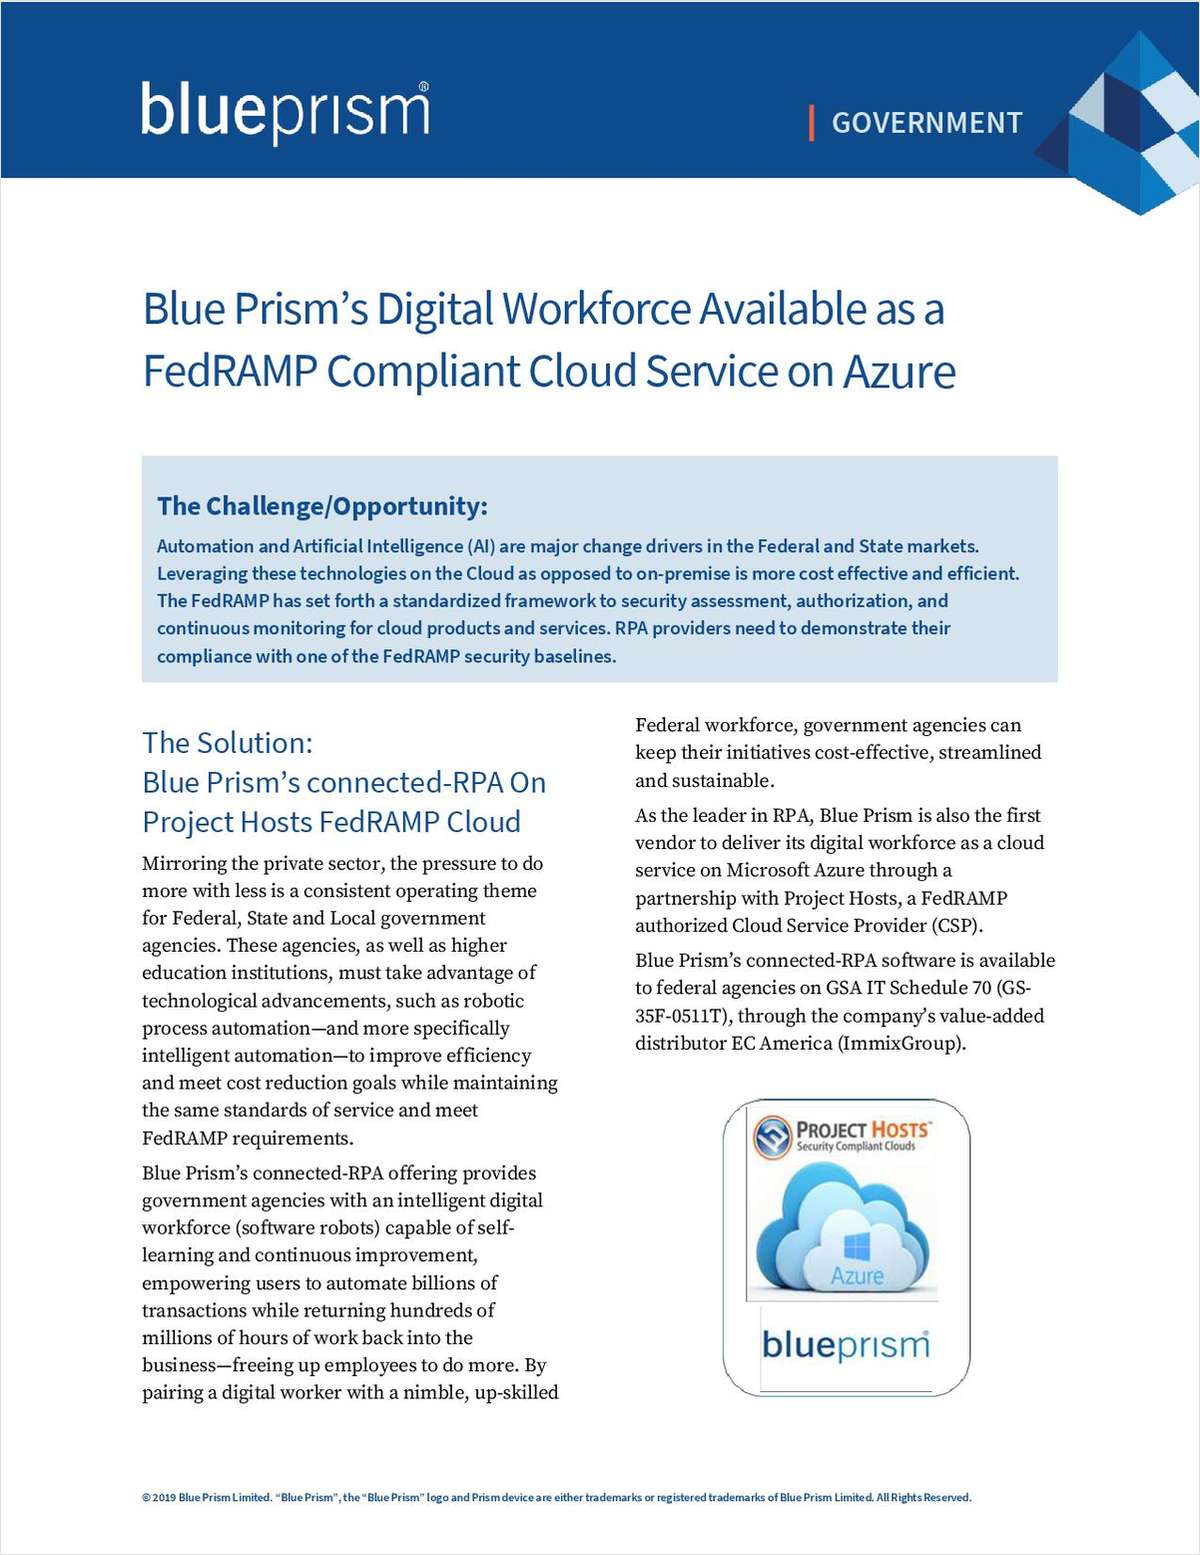 Blue Prism's Digital Workforce Available as a FedRAMP Compliant Cloud Service on Azure